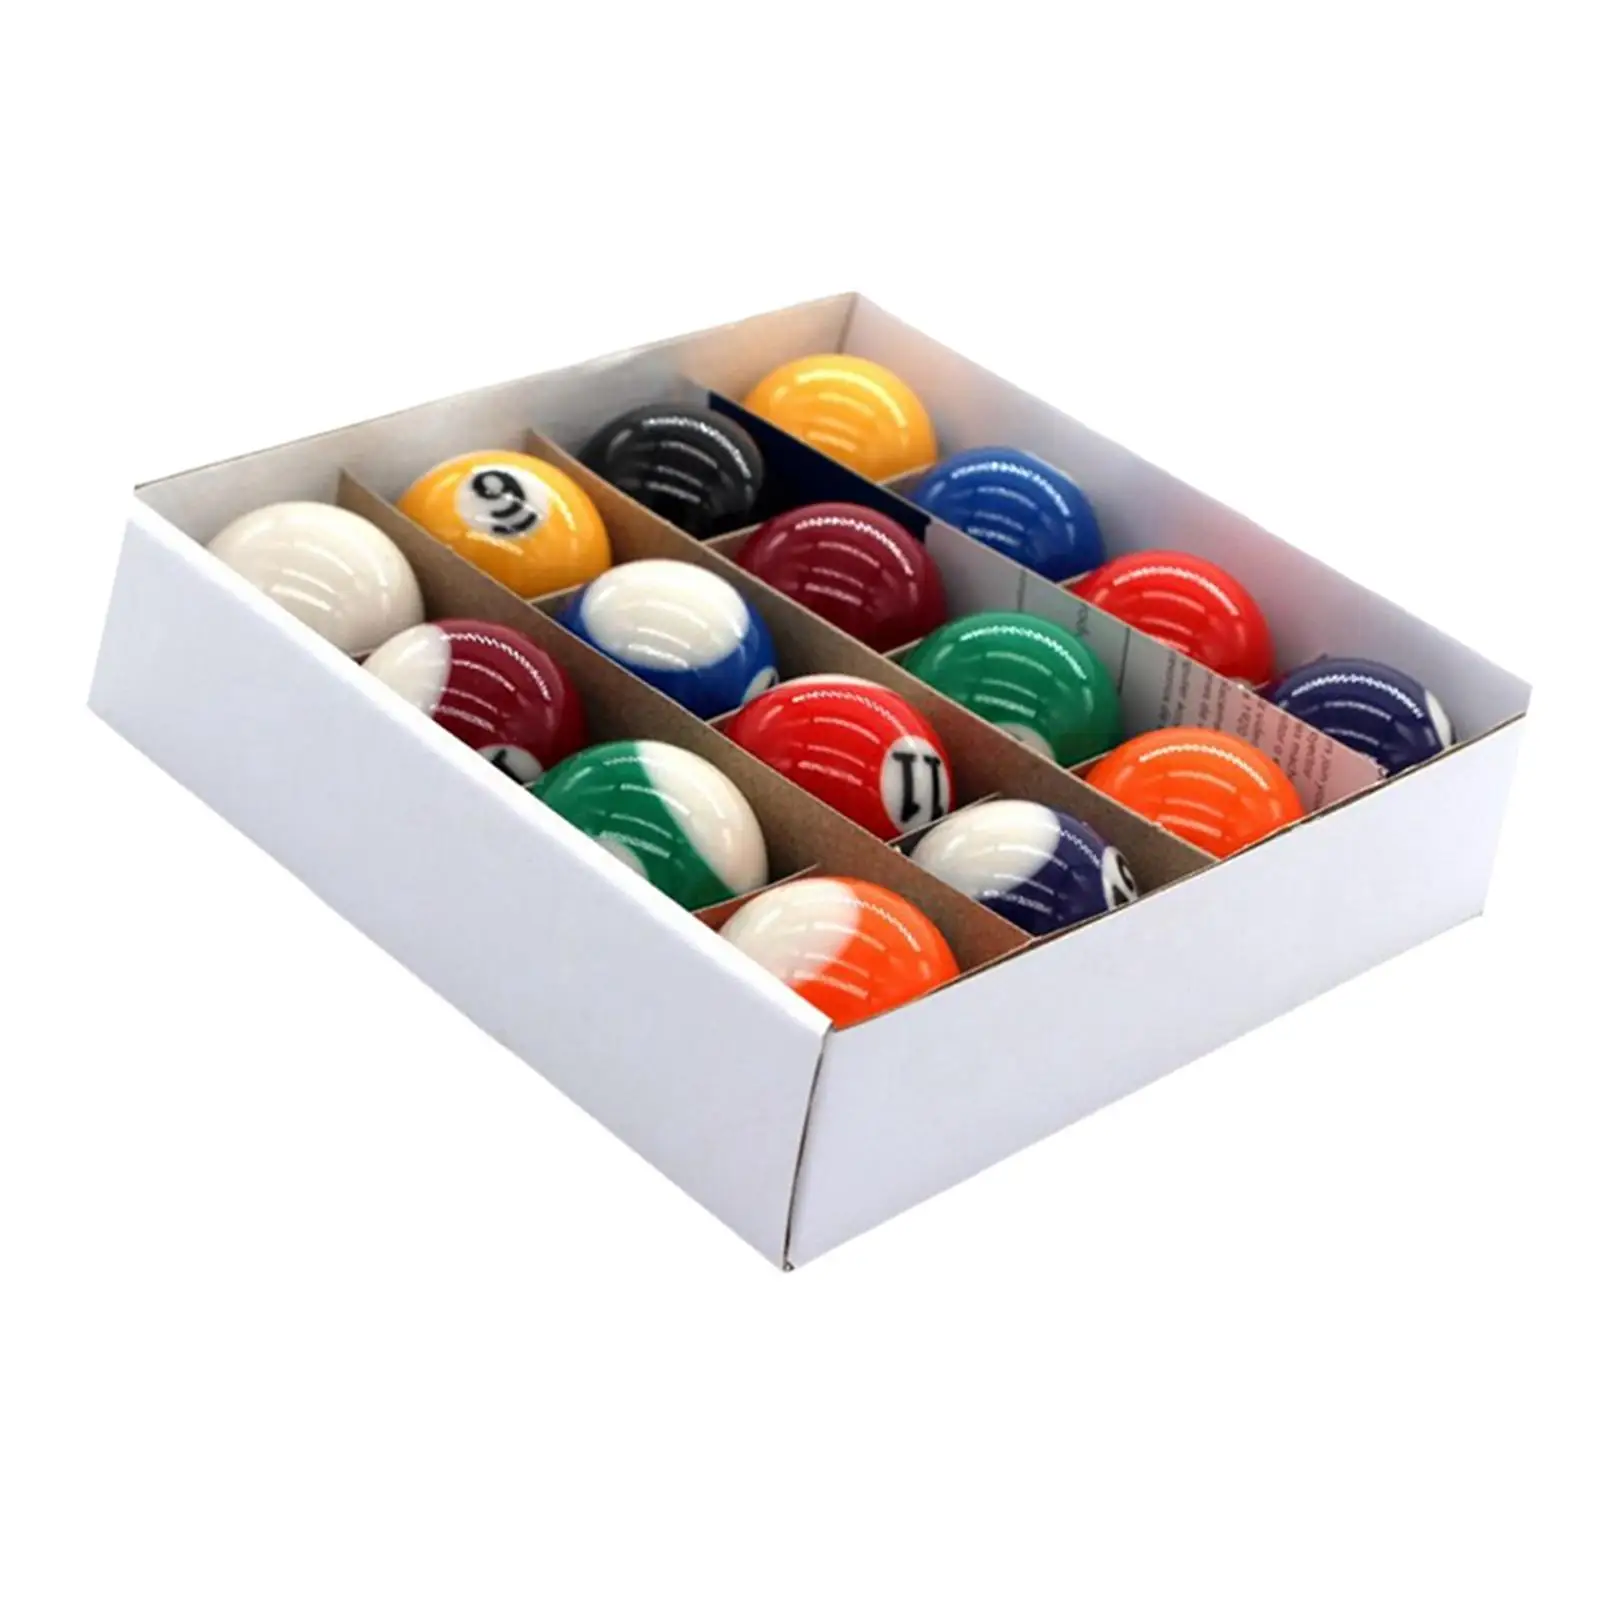 16x Mini Billiard Balls Resin Pool Table Balls Training Toys 25mm Eco Friendly Small Pool Cue Balls for Game Rooms Accessories